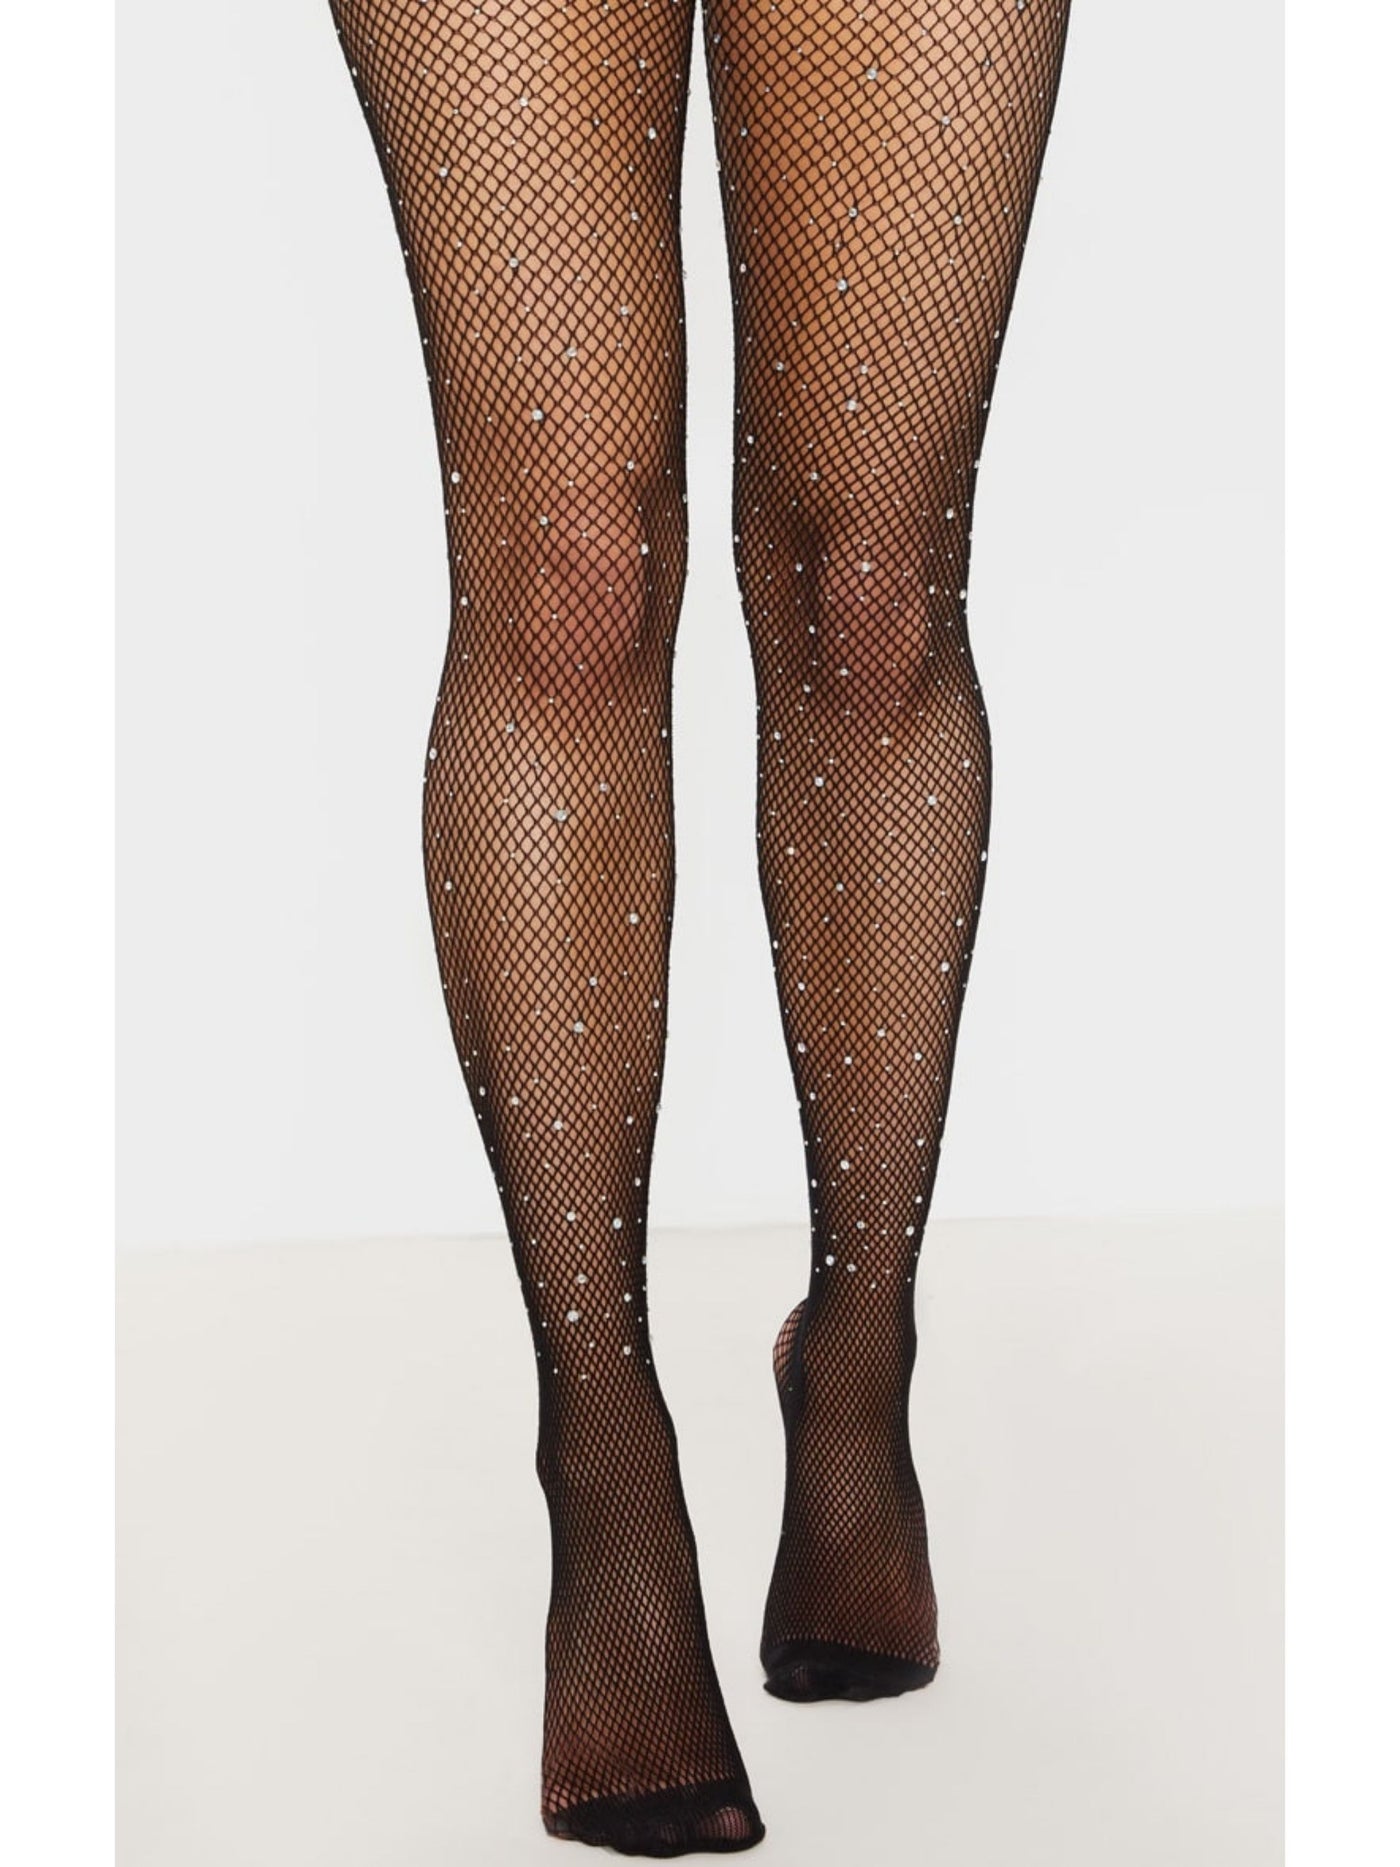 Rhinestone Fishnet Tights restocked in coffee, black and nude 💎